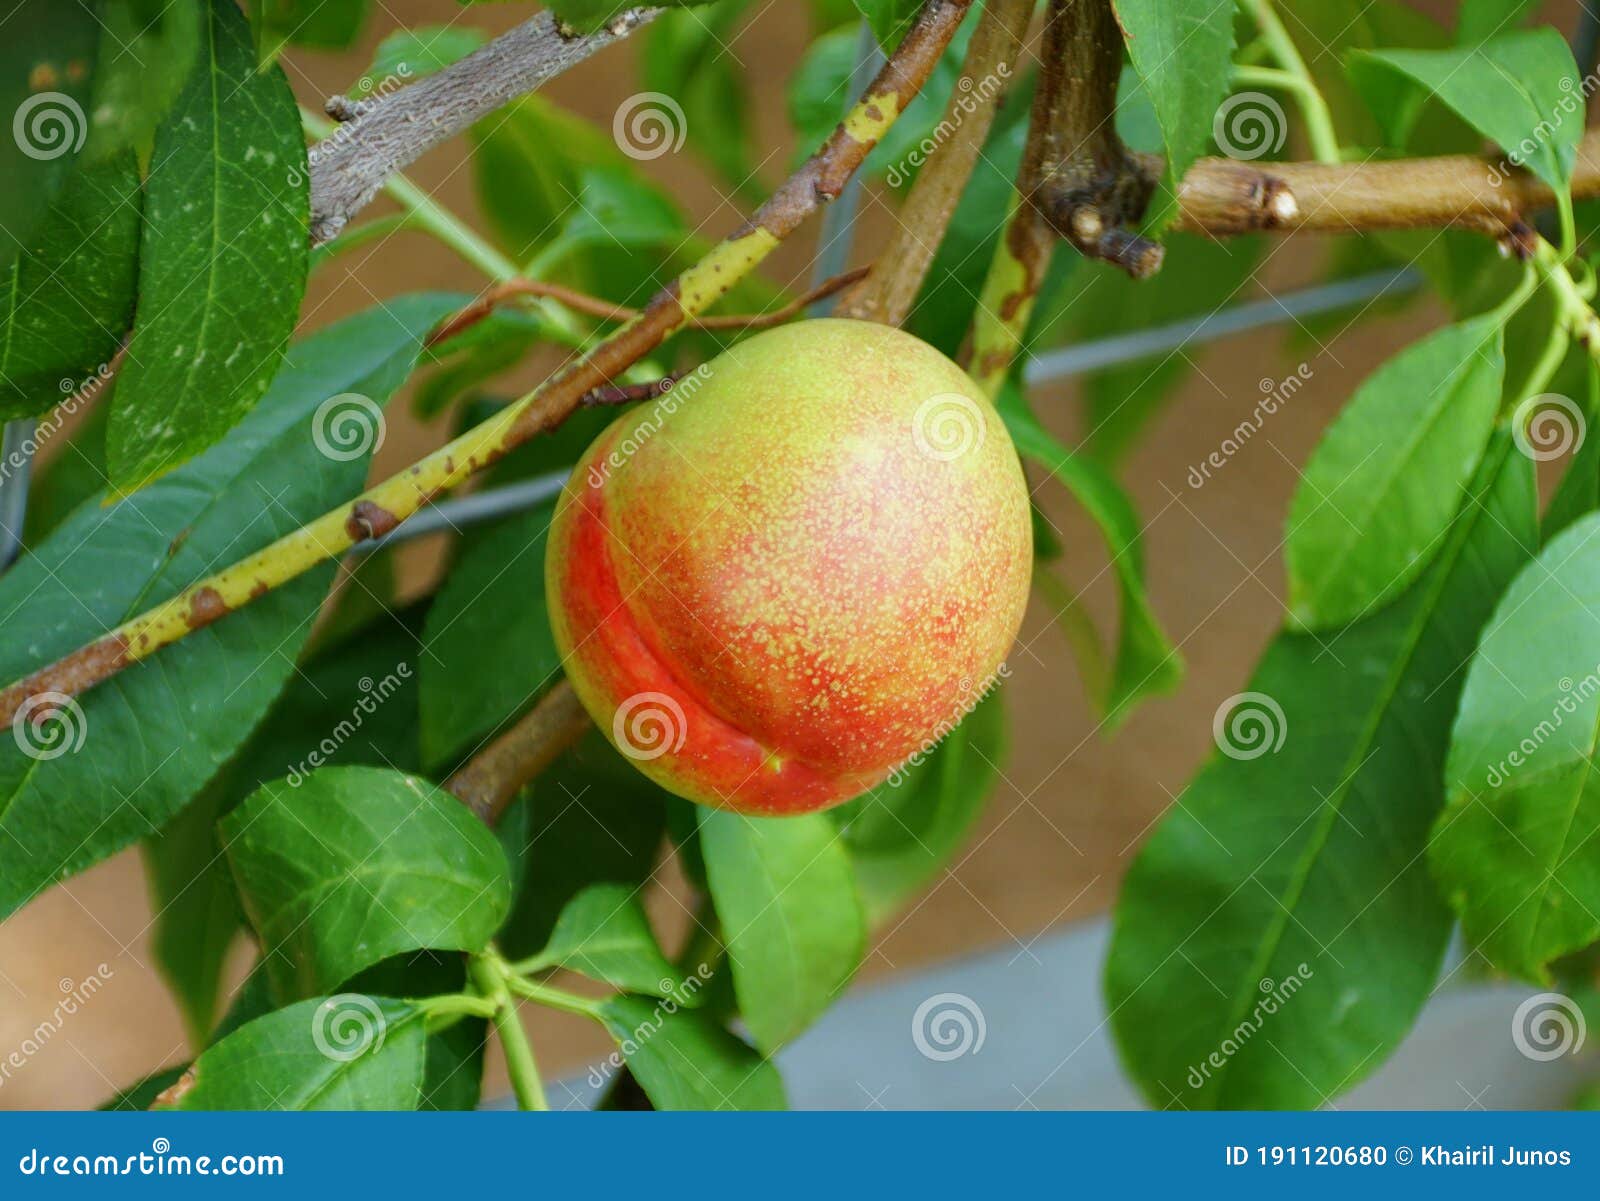 green and red nectarine `fantasia` fruit on the tree